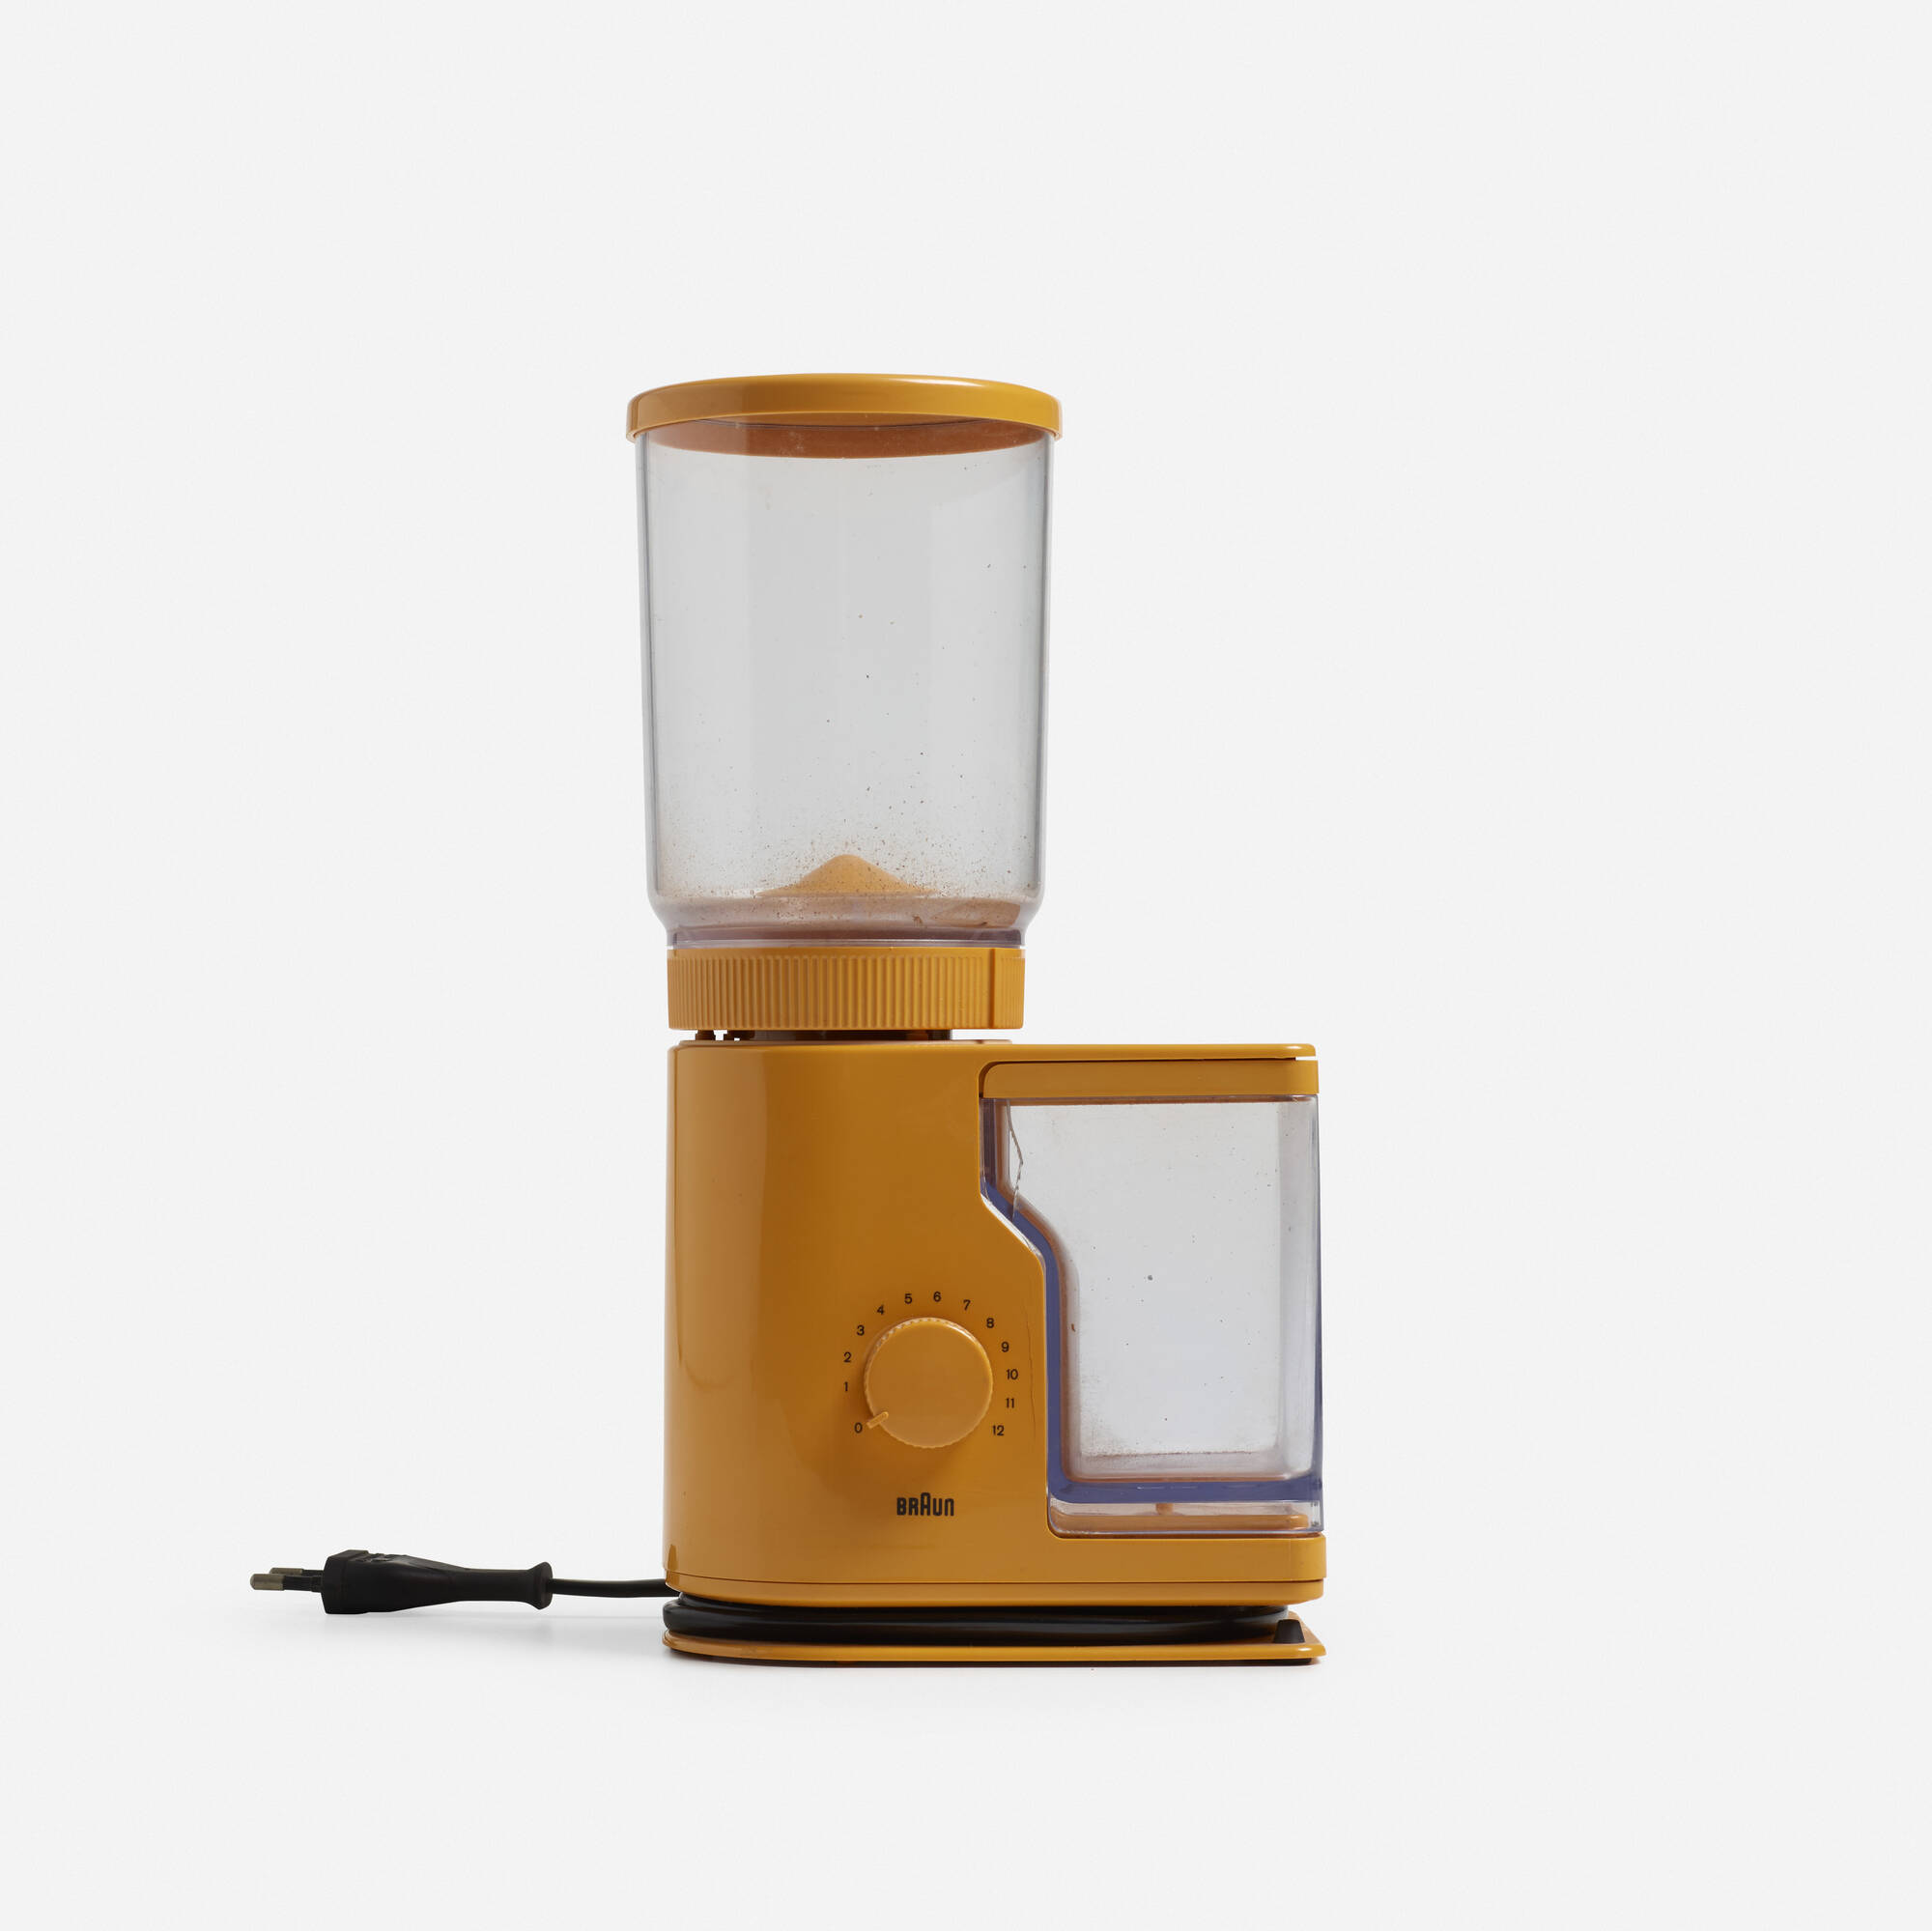 https://www.wright20.com/items/index/2000/176_1_dieter_rams_the_jf_chen_collection_july_2018_reinhold_weiss_and_hartwig_kahlcke_kmm_10_coffee_grinder__wright_auction.jpg?t=1533138735